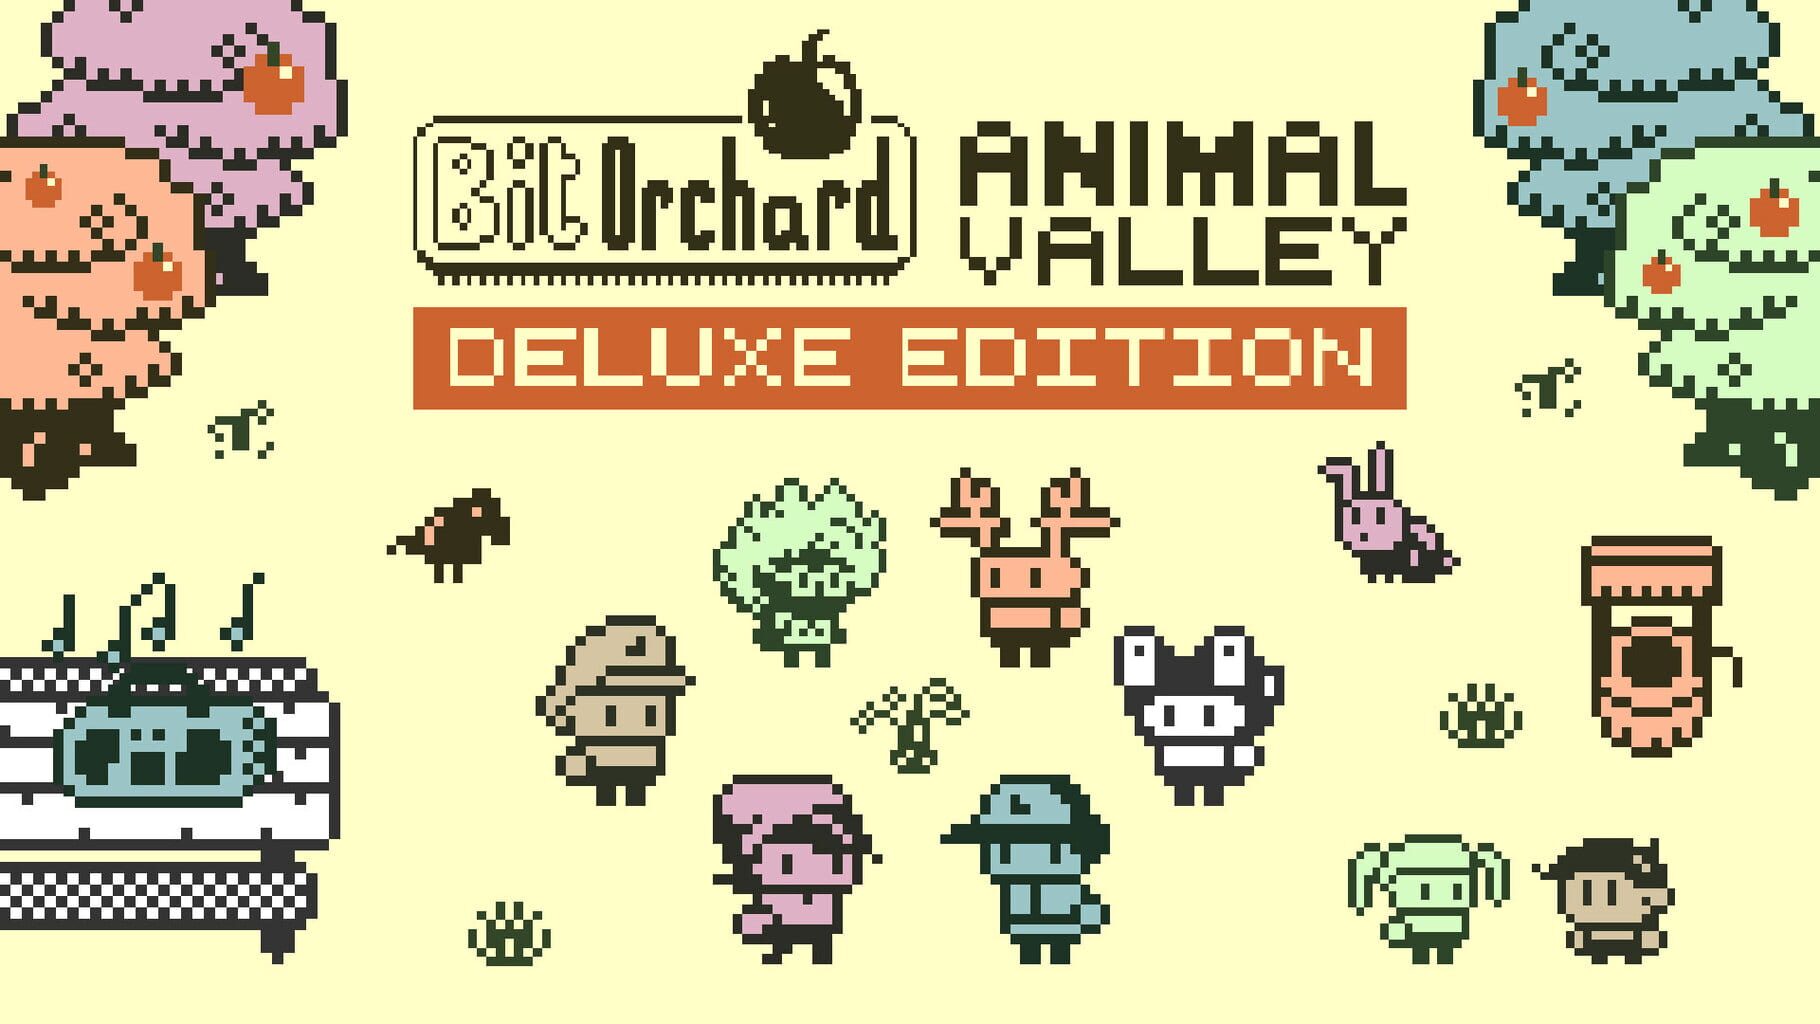 Bit Orchard: Animal Valley - Deluxe Edition artwork